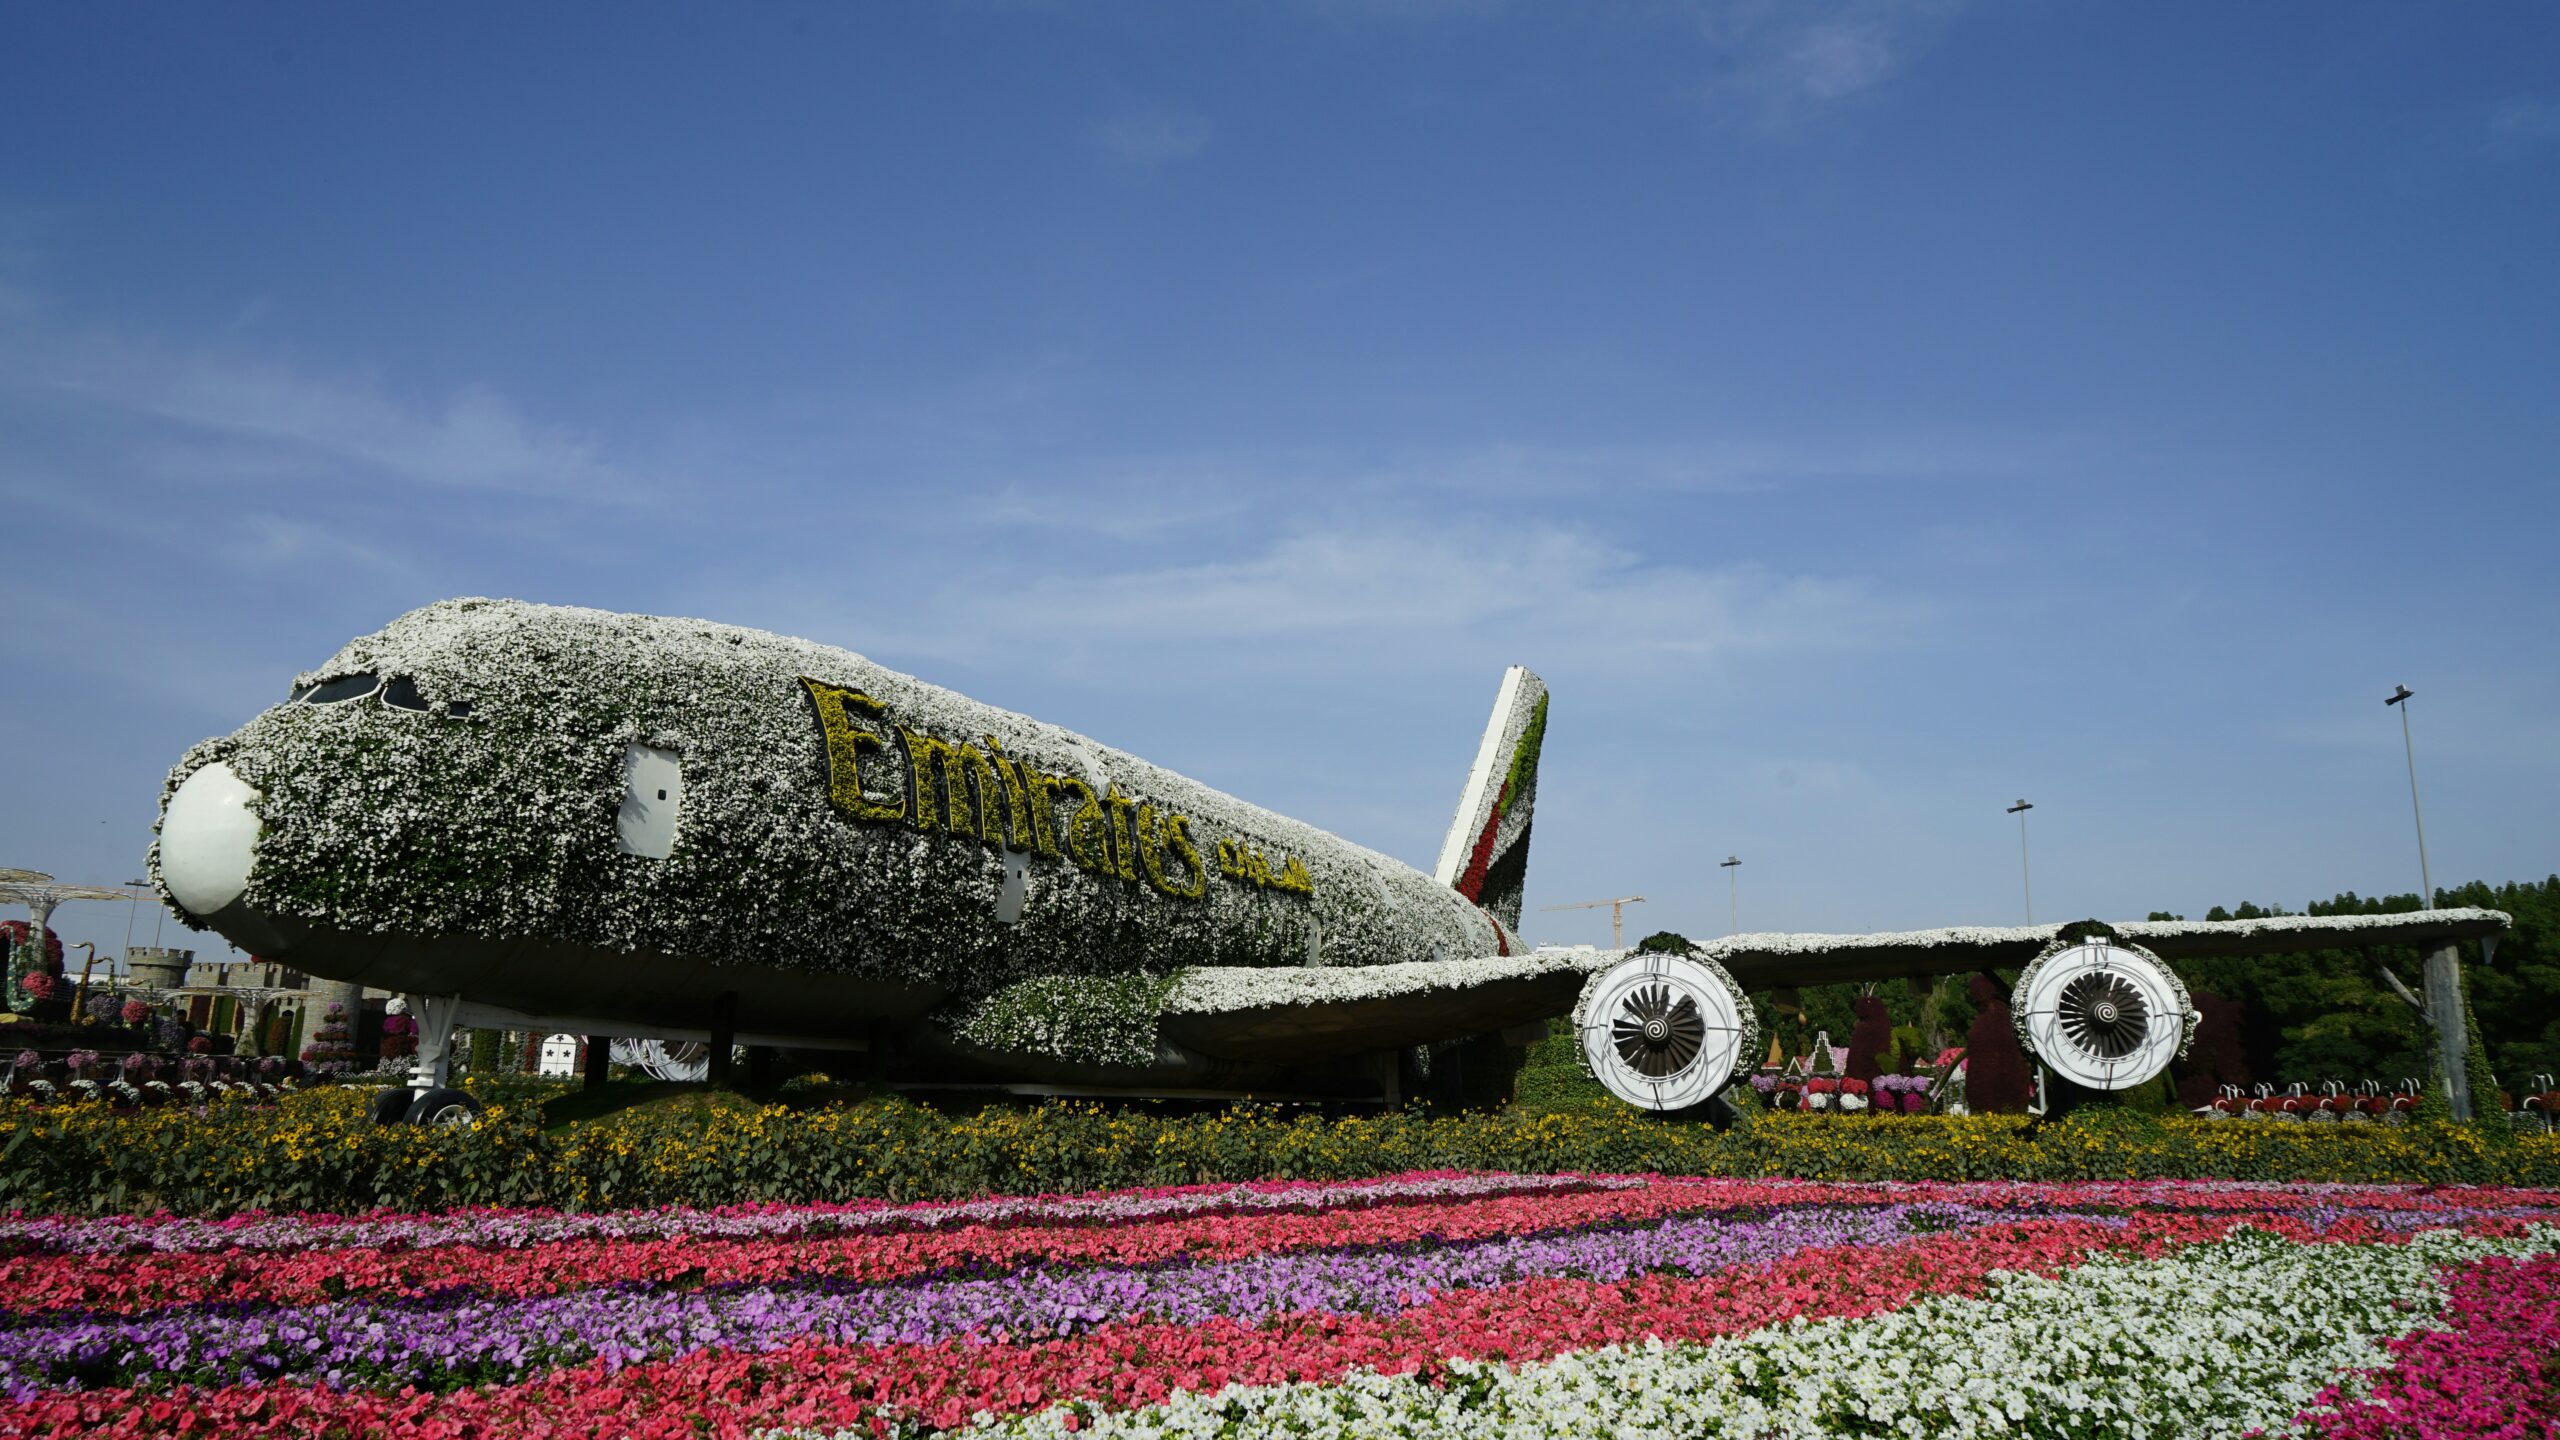 Learn more about the upcoming construction plans for the Dubai airport. 
pictured: a botanical replica of an Emirate’s Airline aircraft